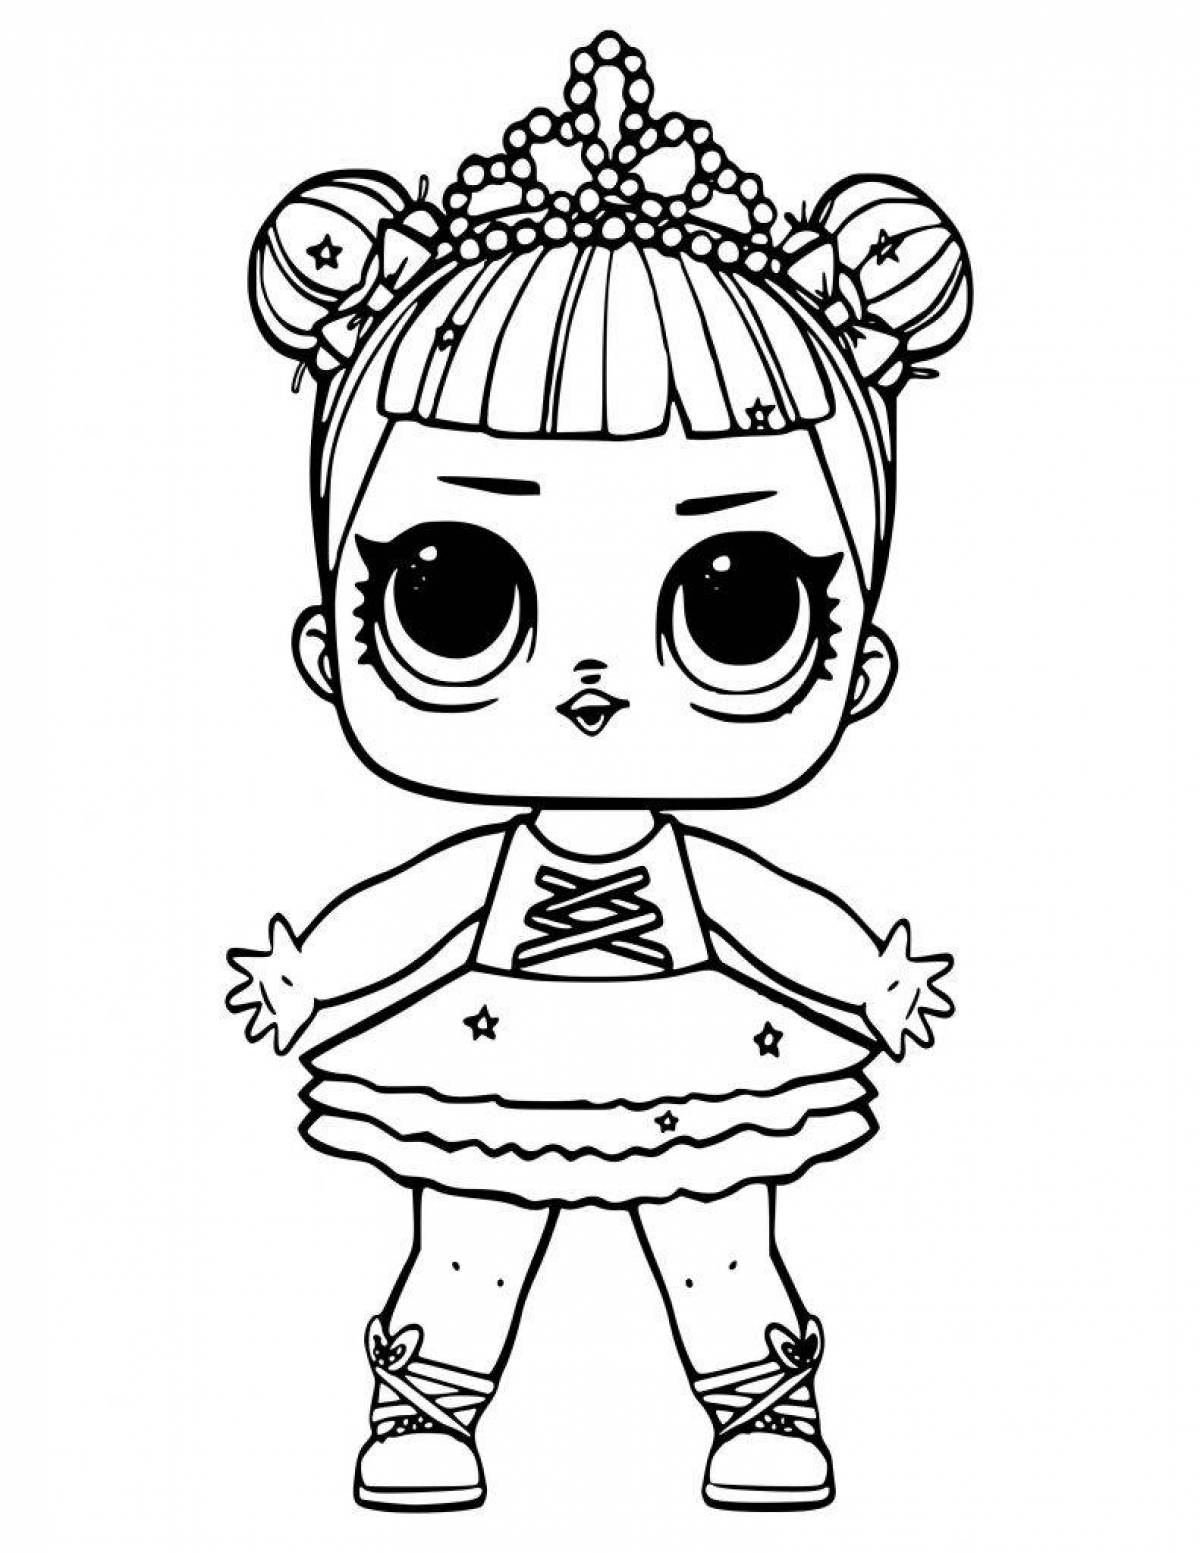 Sweet lola dolls coloring pages for kids